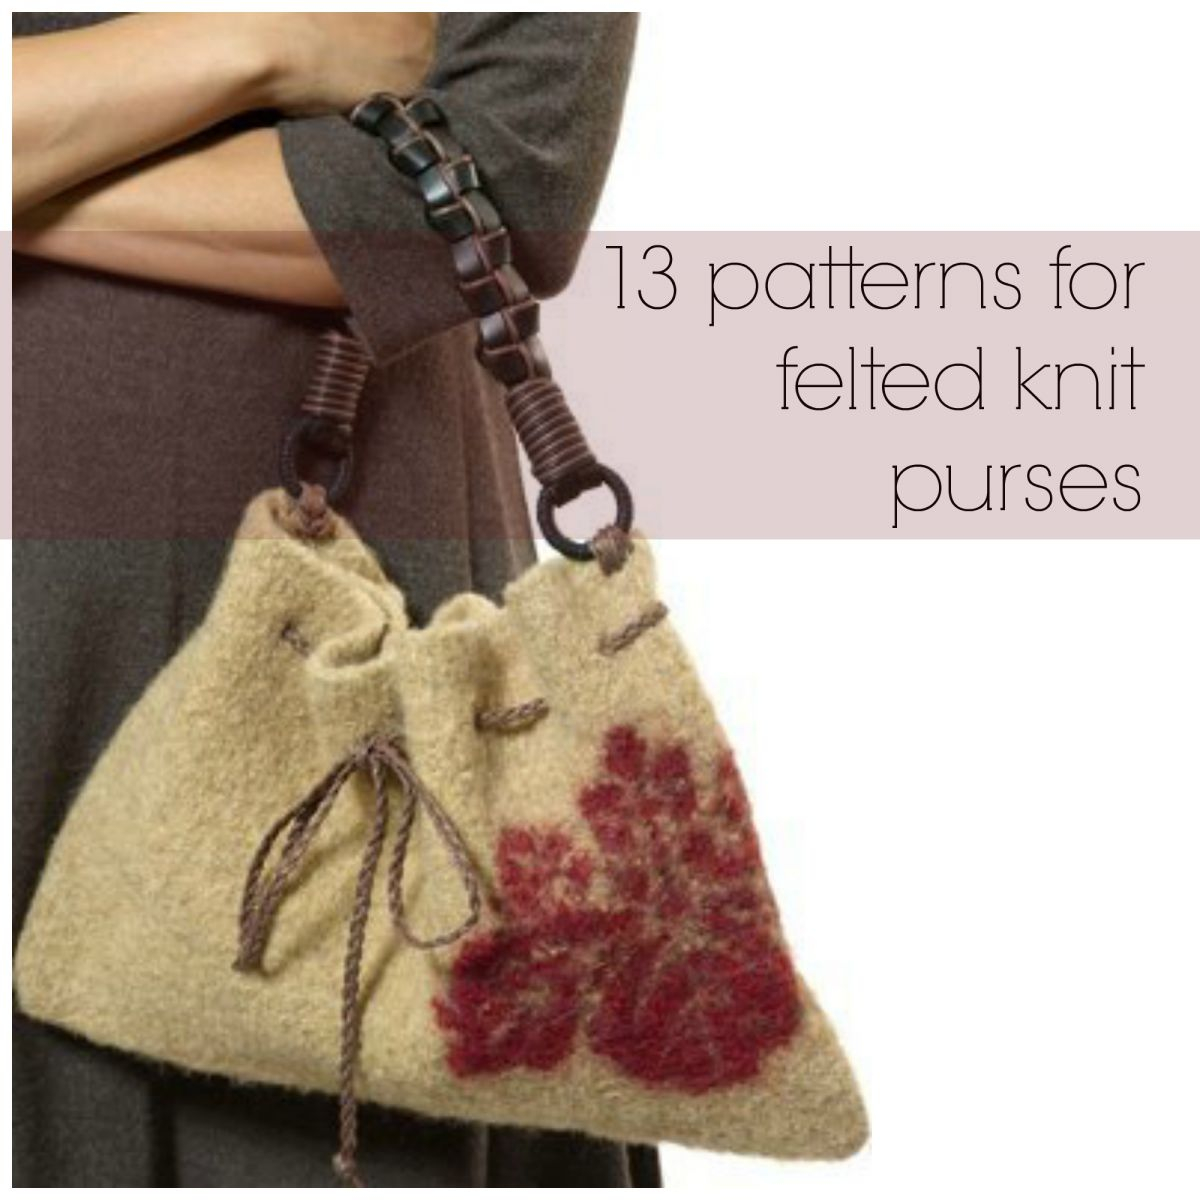 Knitted Bag Pattern 13 Patterns For Felted Knit Purses Allfreeknitting